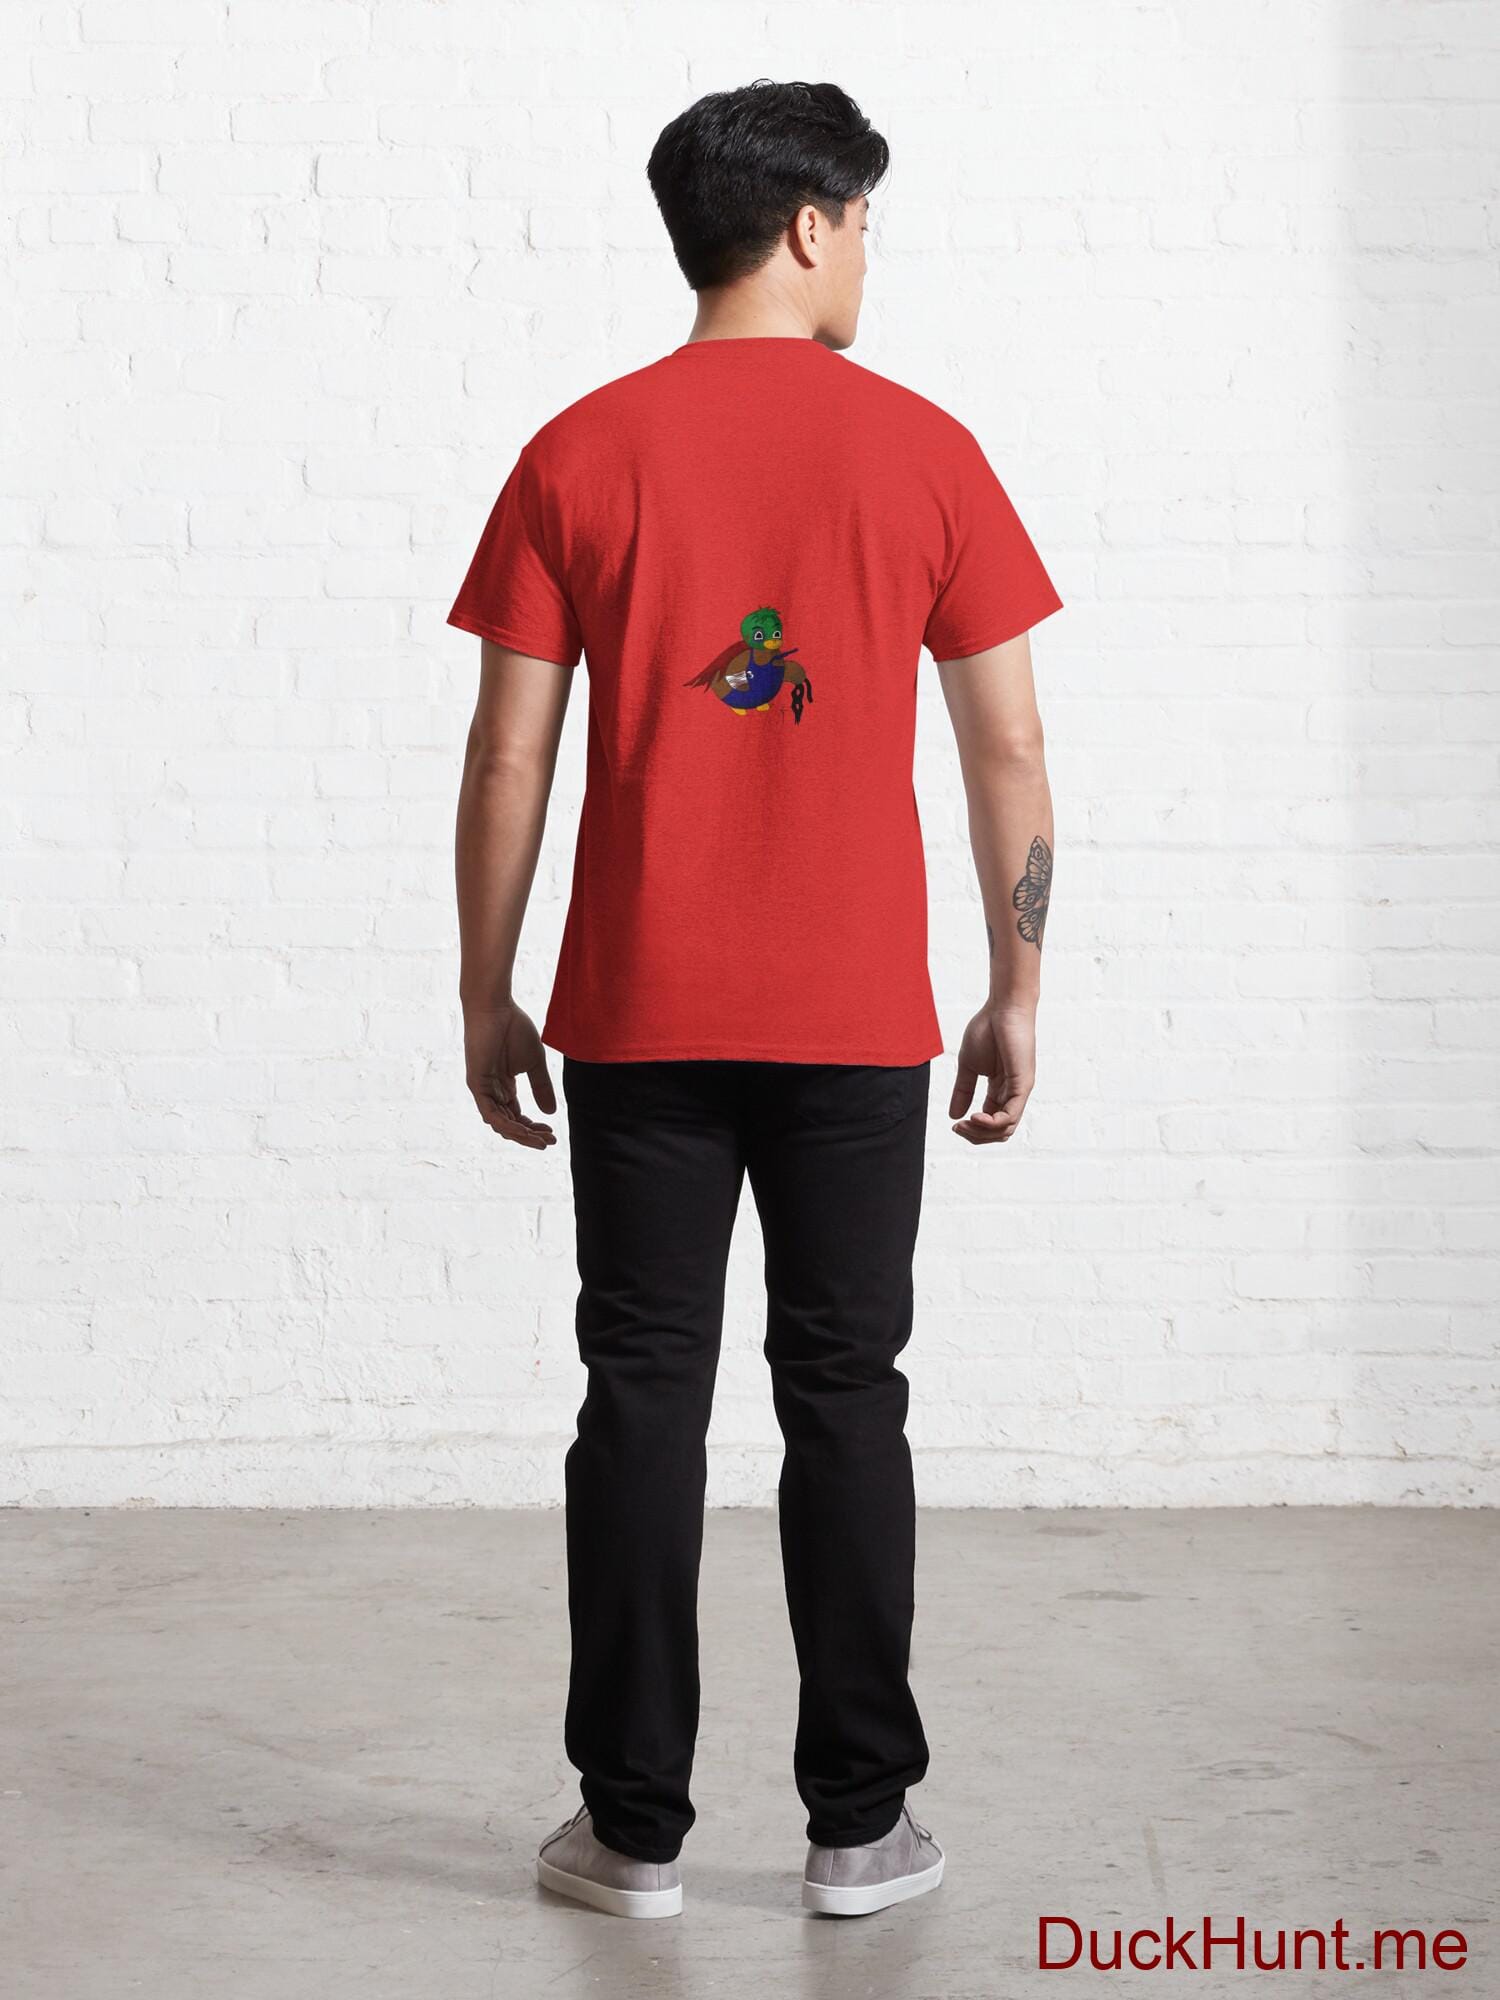 Dead DuckHunt Boss (smokeless) Red Classic T-Shirt (Back printed) alternative image 3